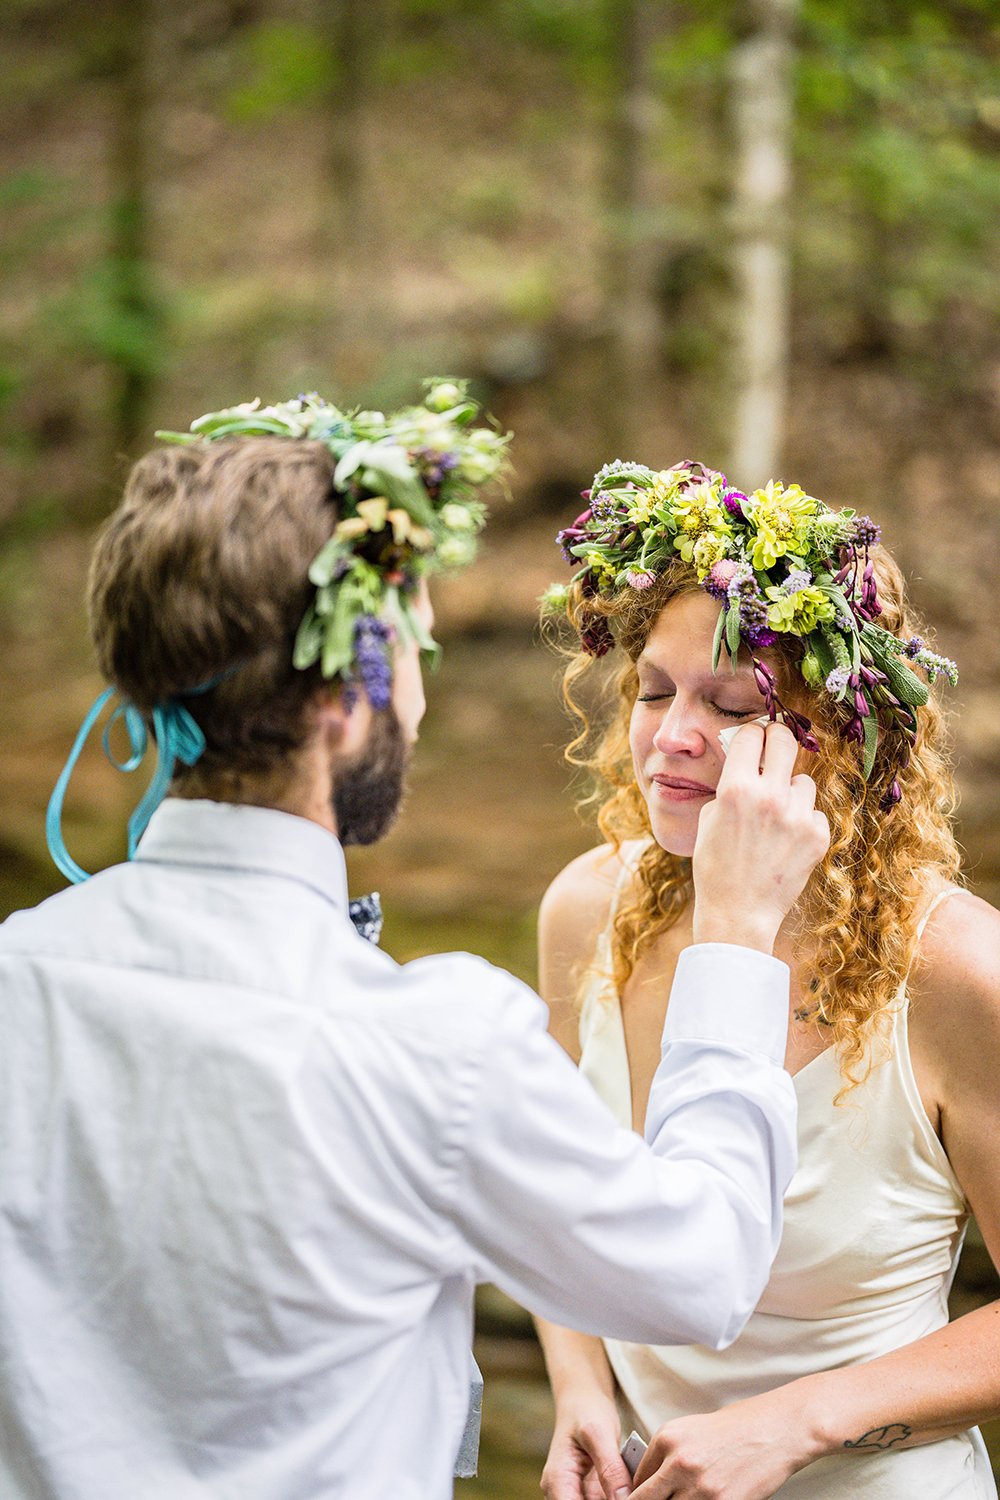 A bride sheds a tear and a groom pats her cheek with a tissue during their elopement ceremony at Fishburn Park in Roanoke, Virginia.